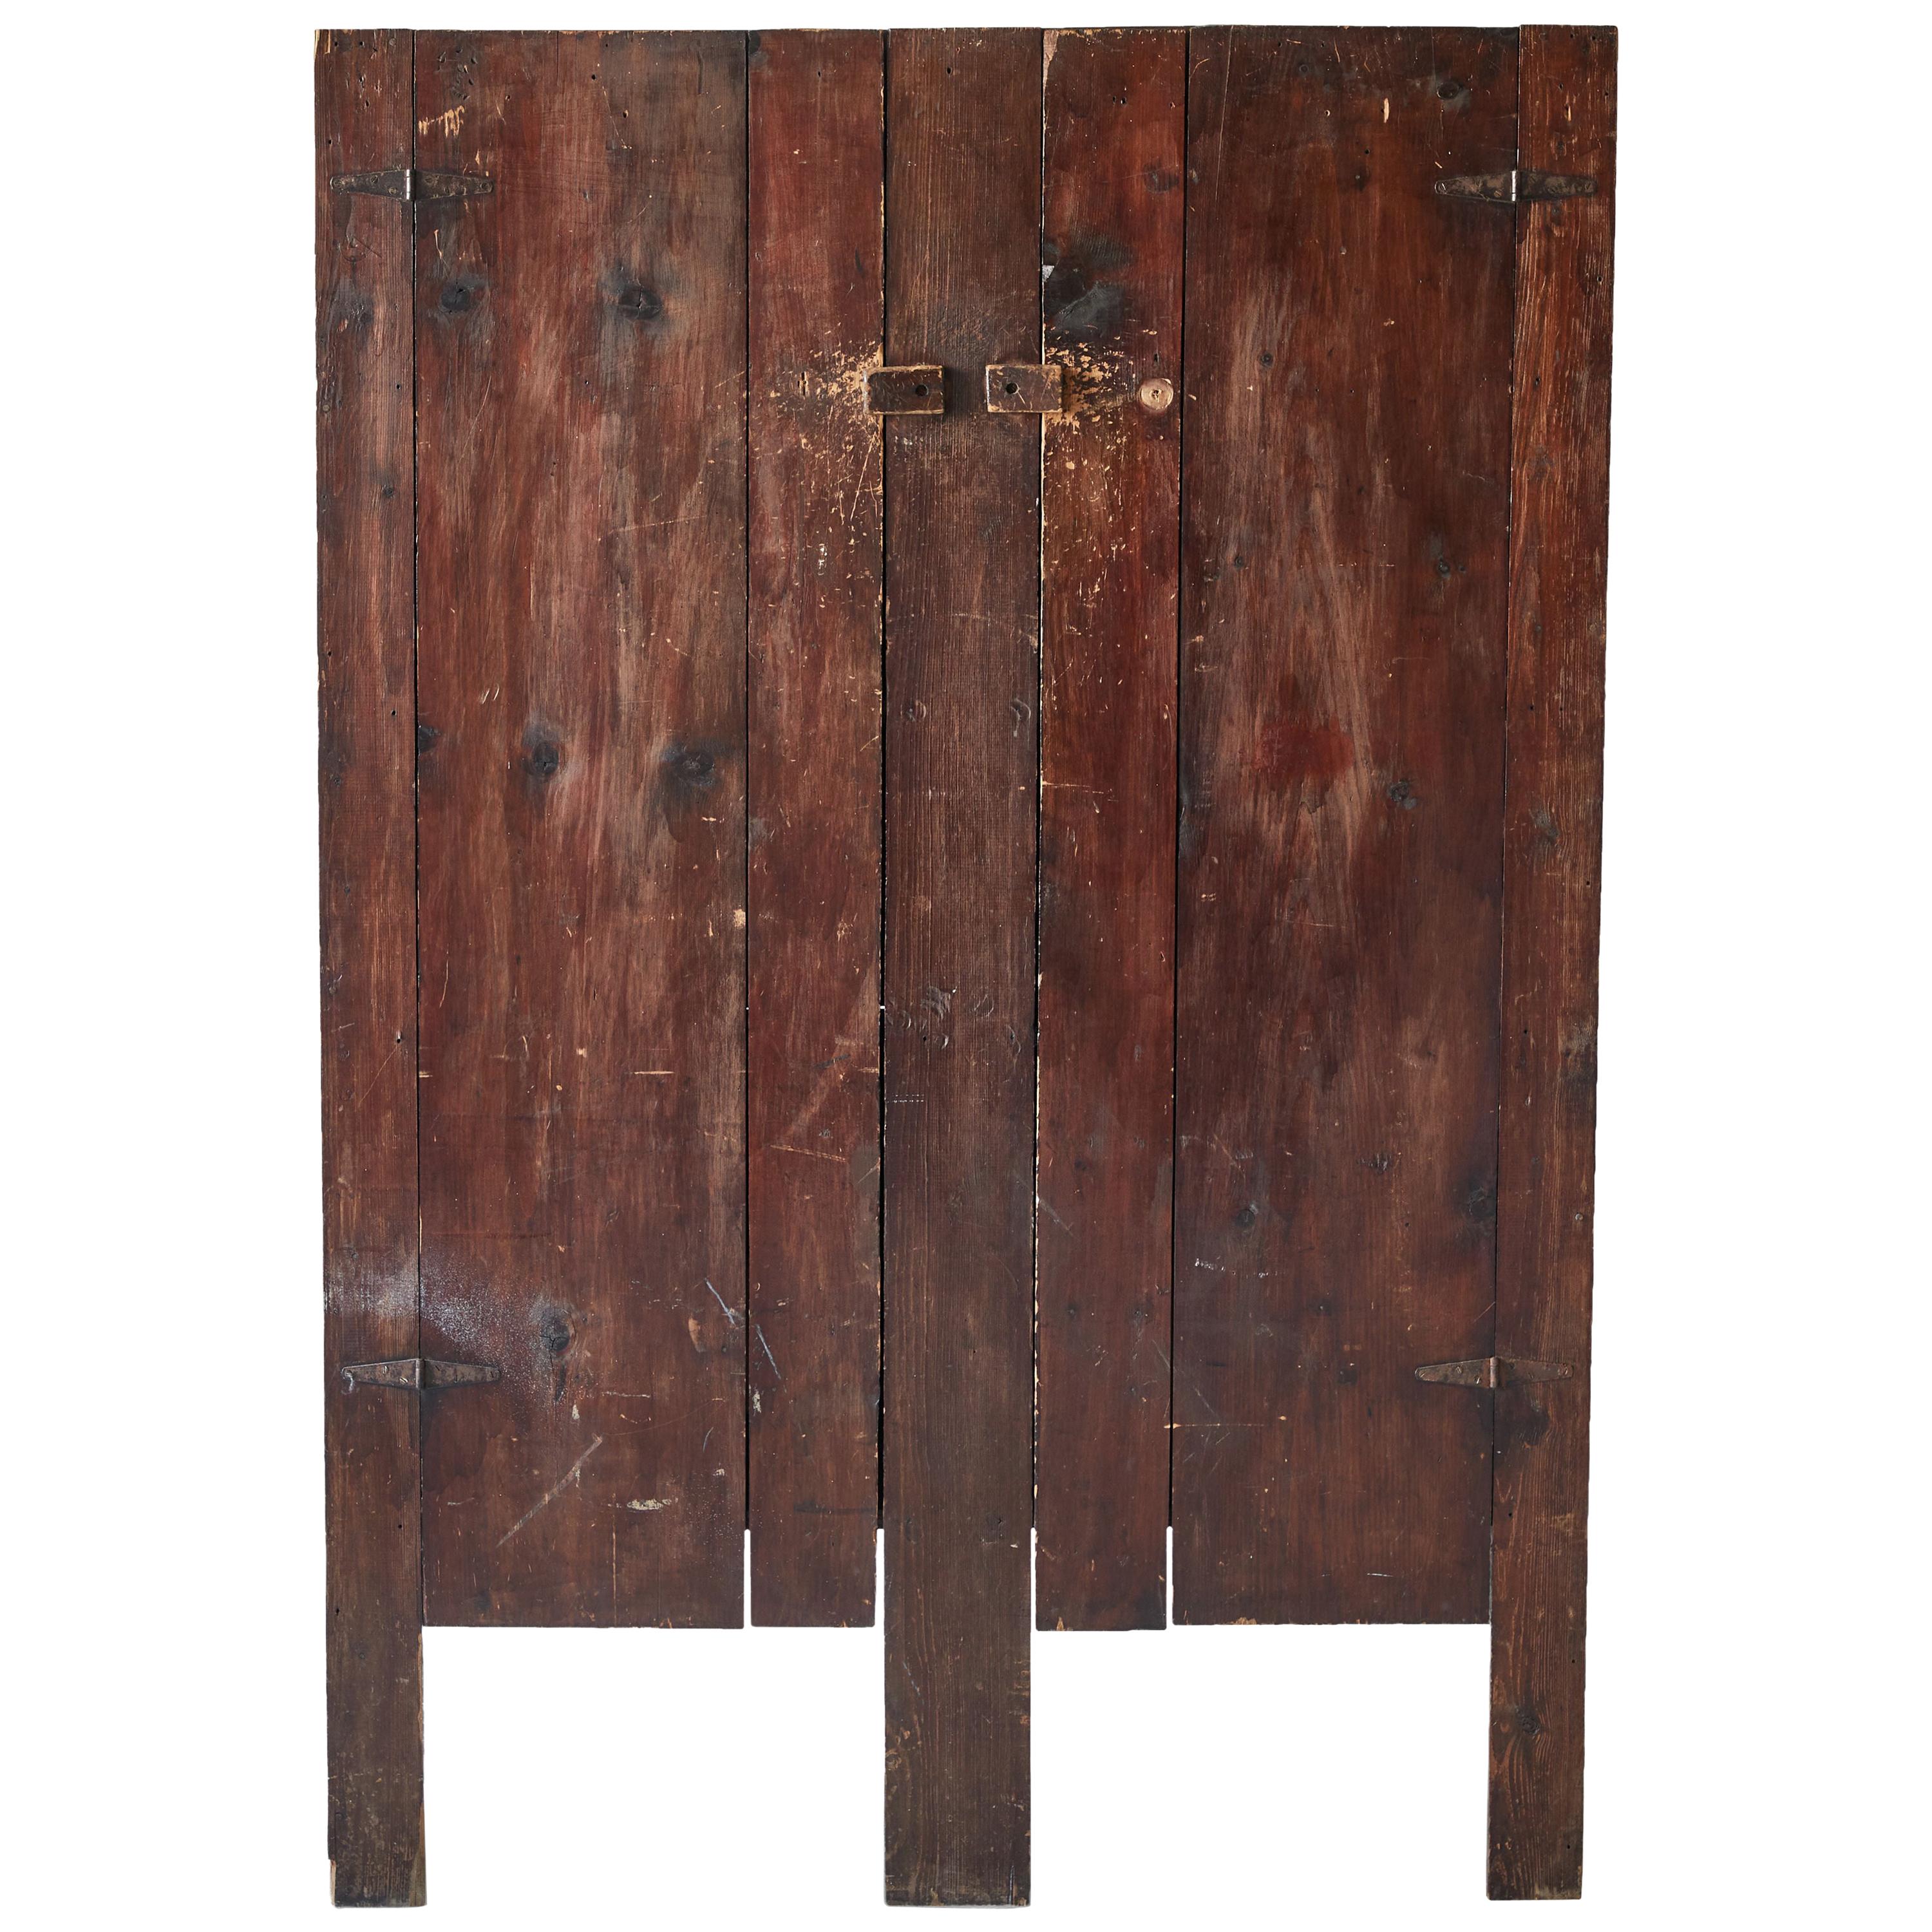 Early American Rustic Slatted Two-Door Cabinet